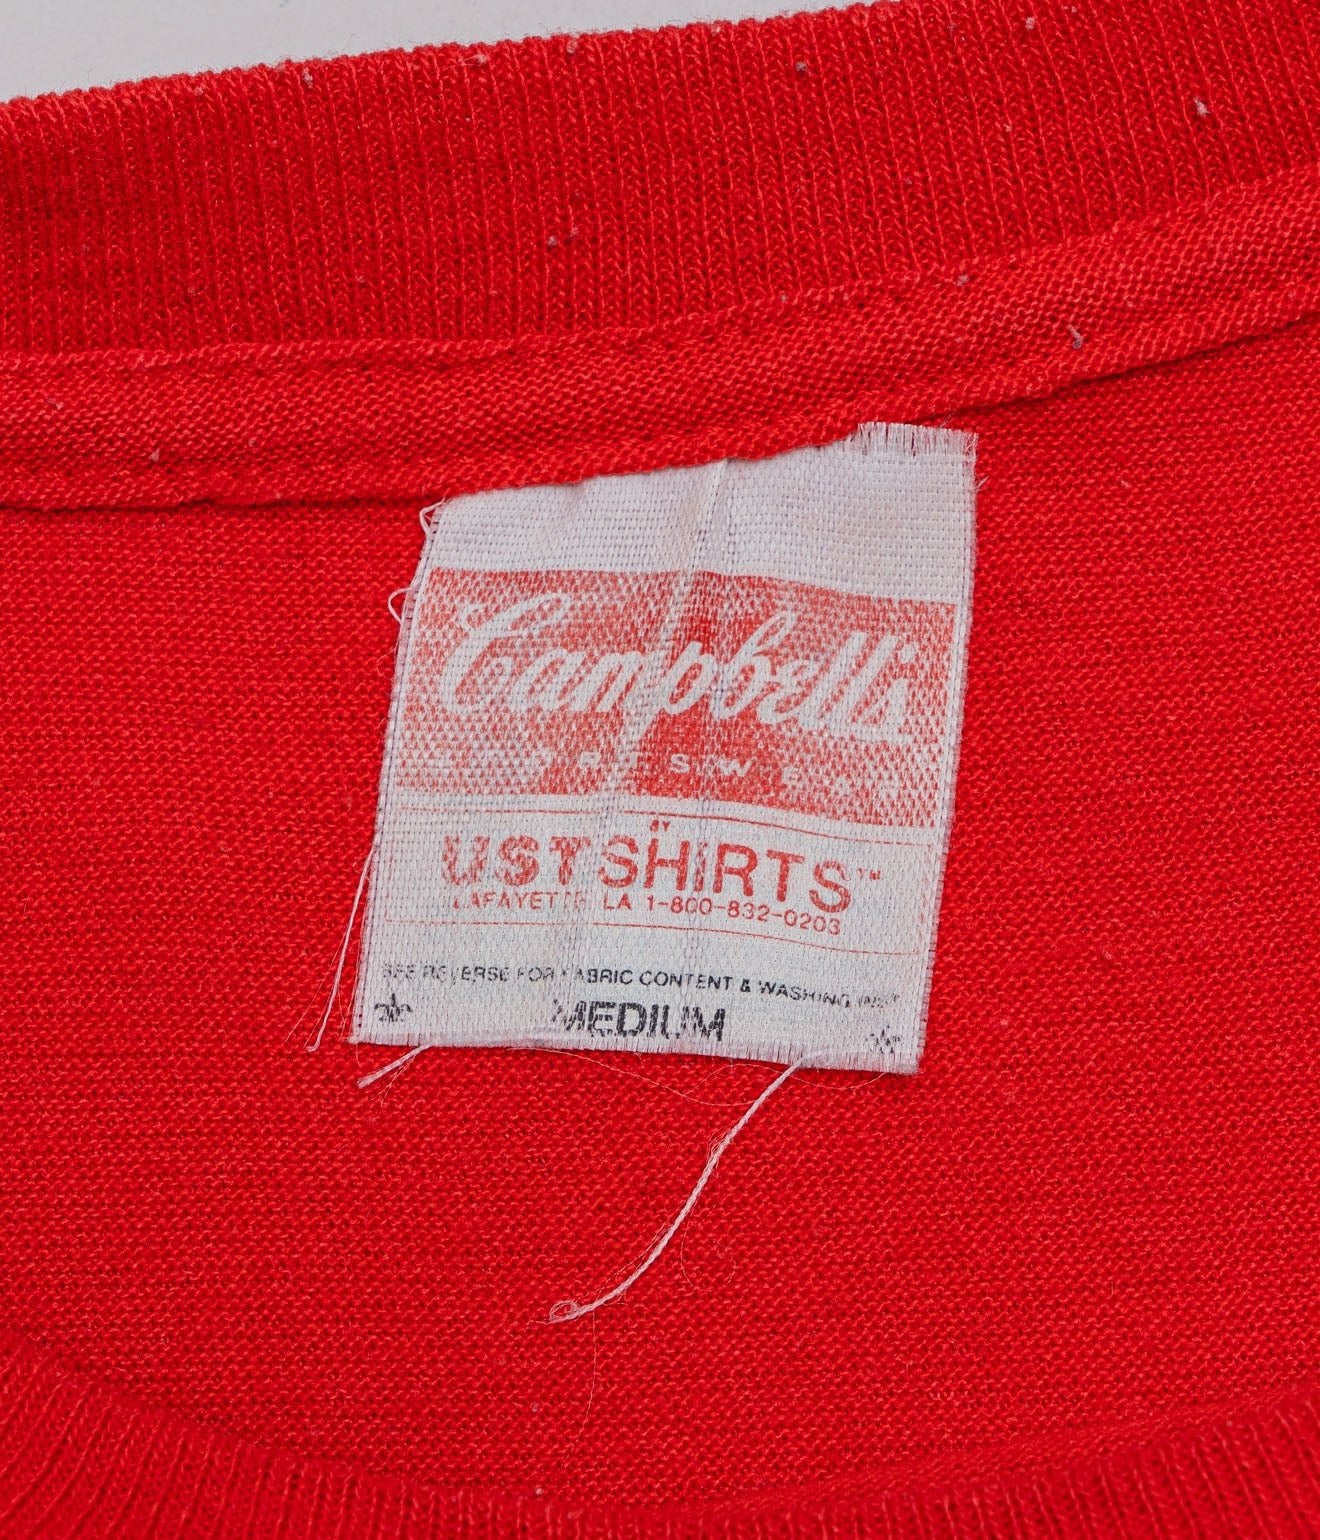 1988 "Campbell's Soup Can" T-SHIRT - WEAREALLANIMALS